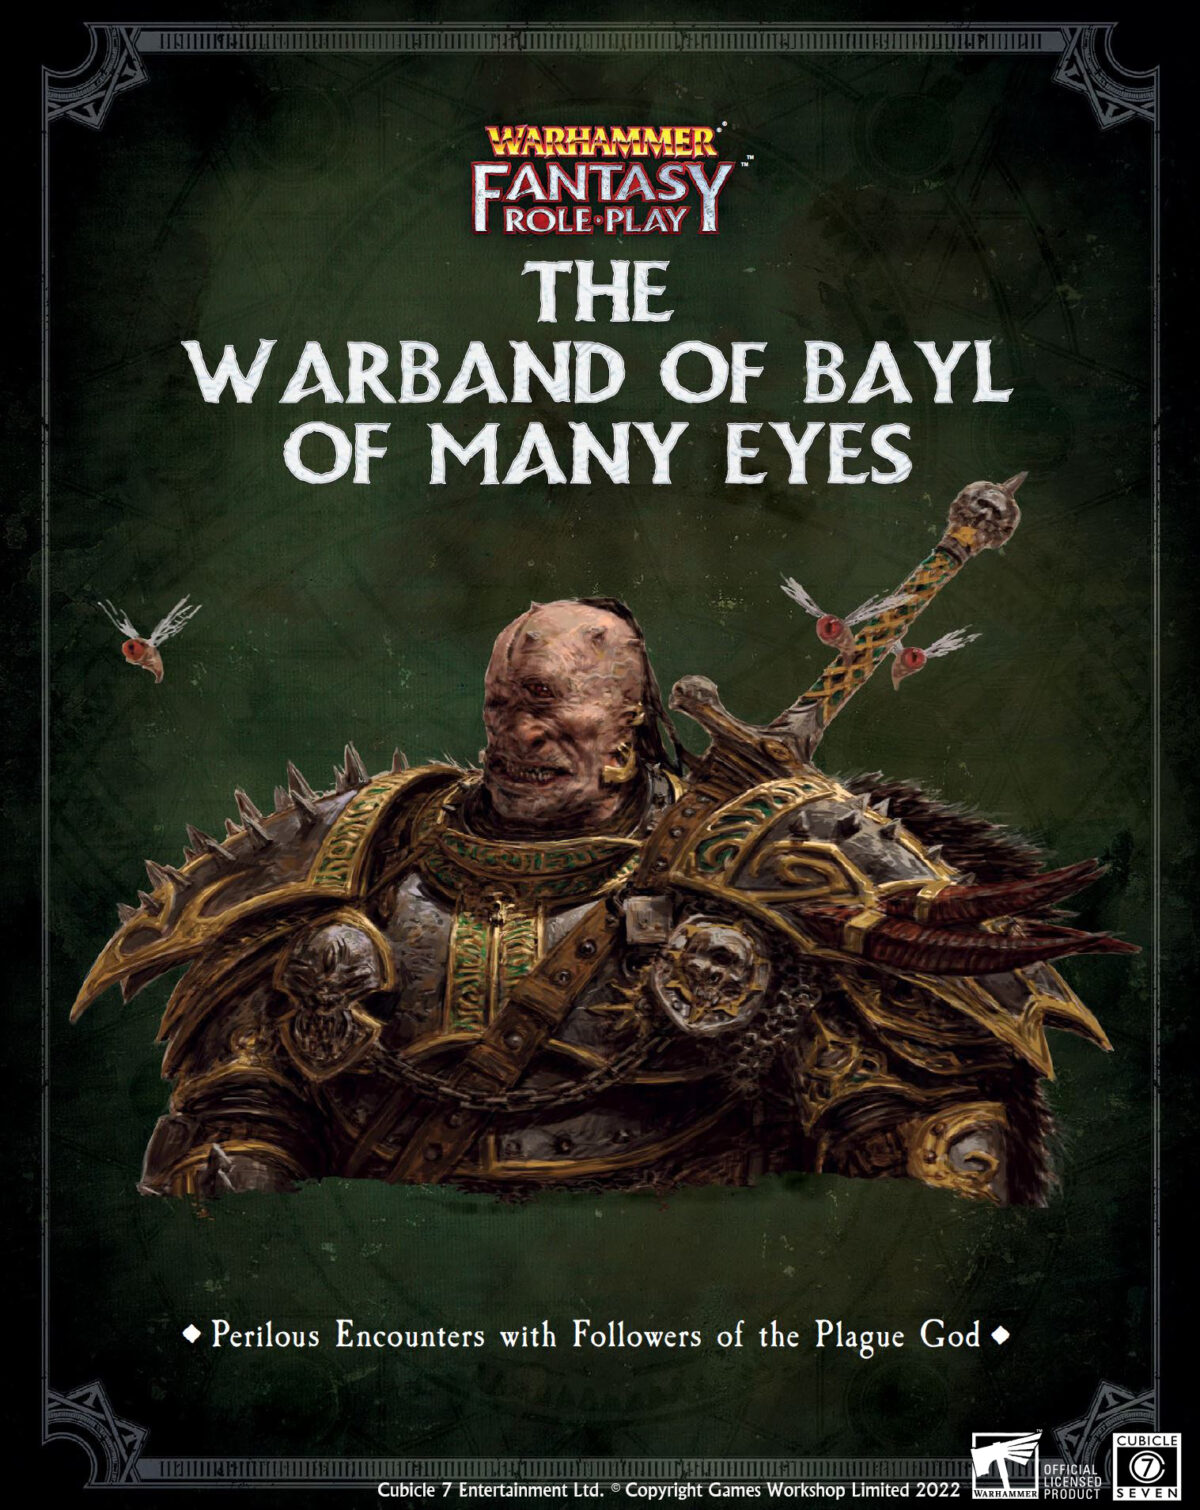 The Warband Of Bayl Of Many Eyes - Warhammer Fantasy Role-Play